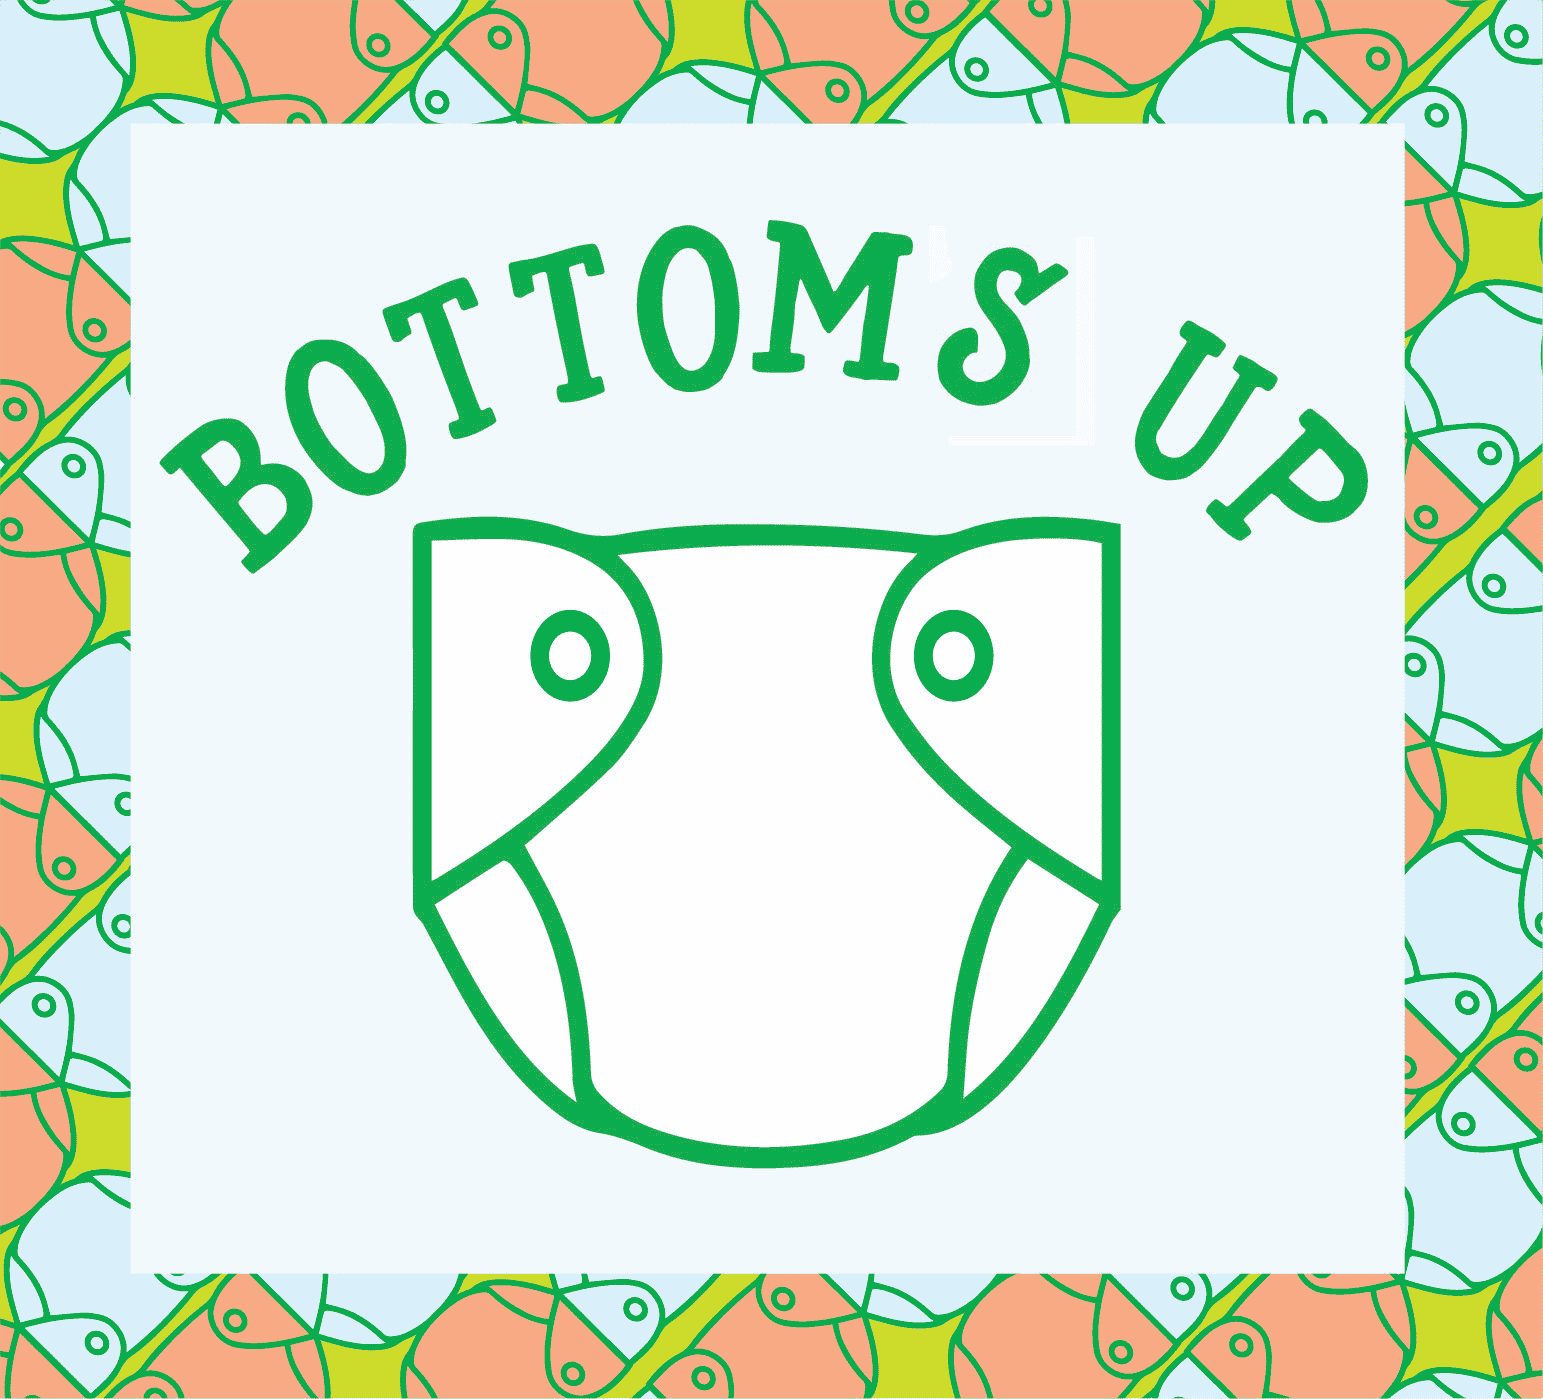 BOTTOMS UP LOGO with BORDER